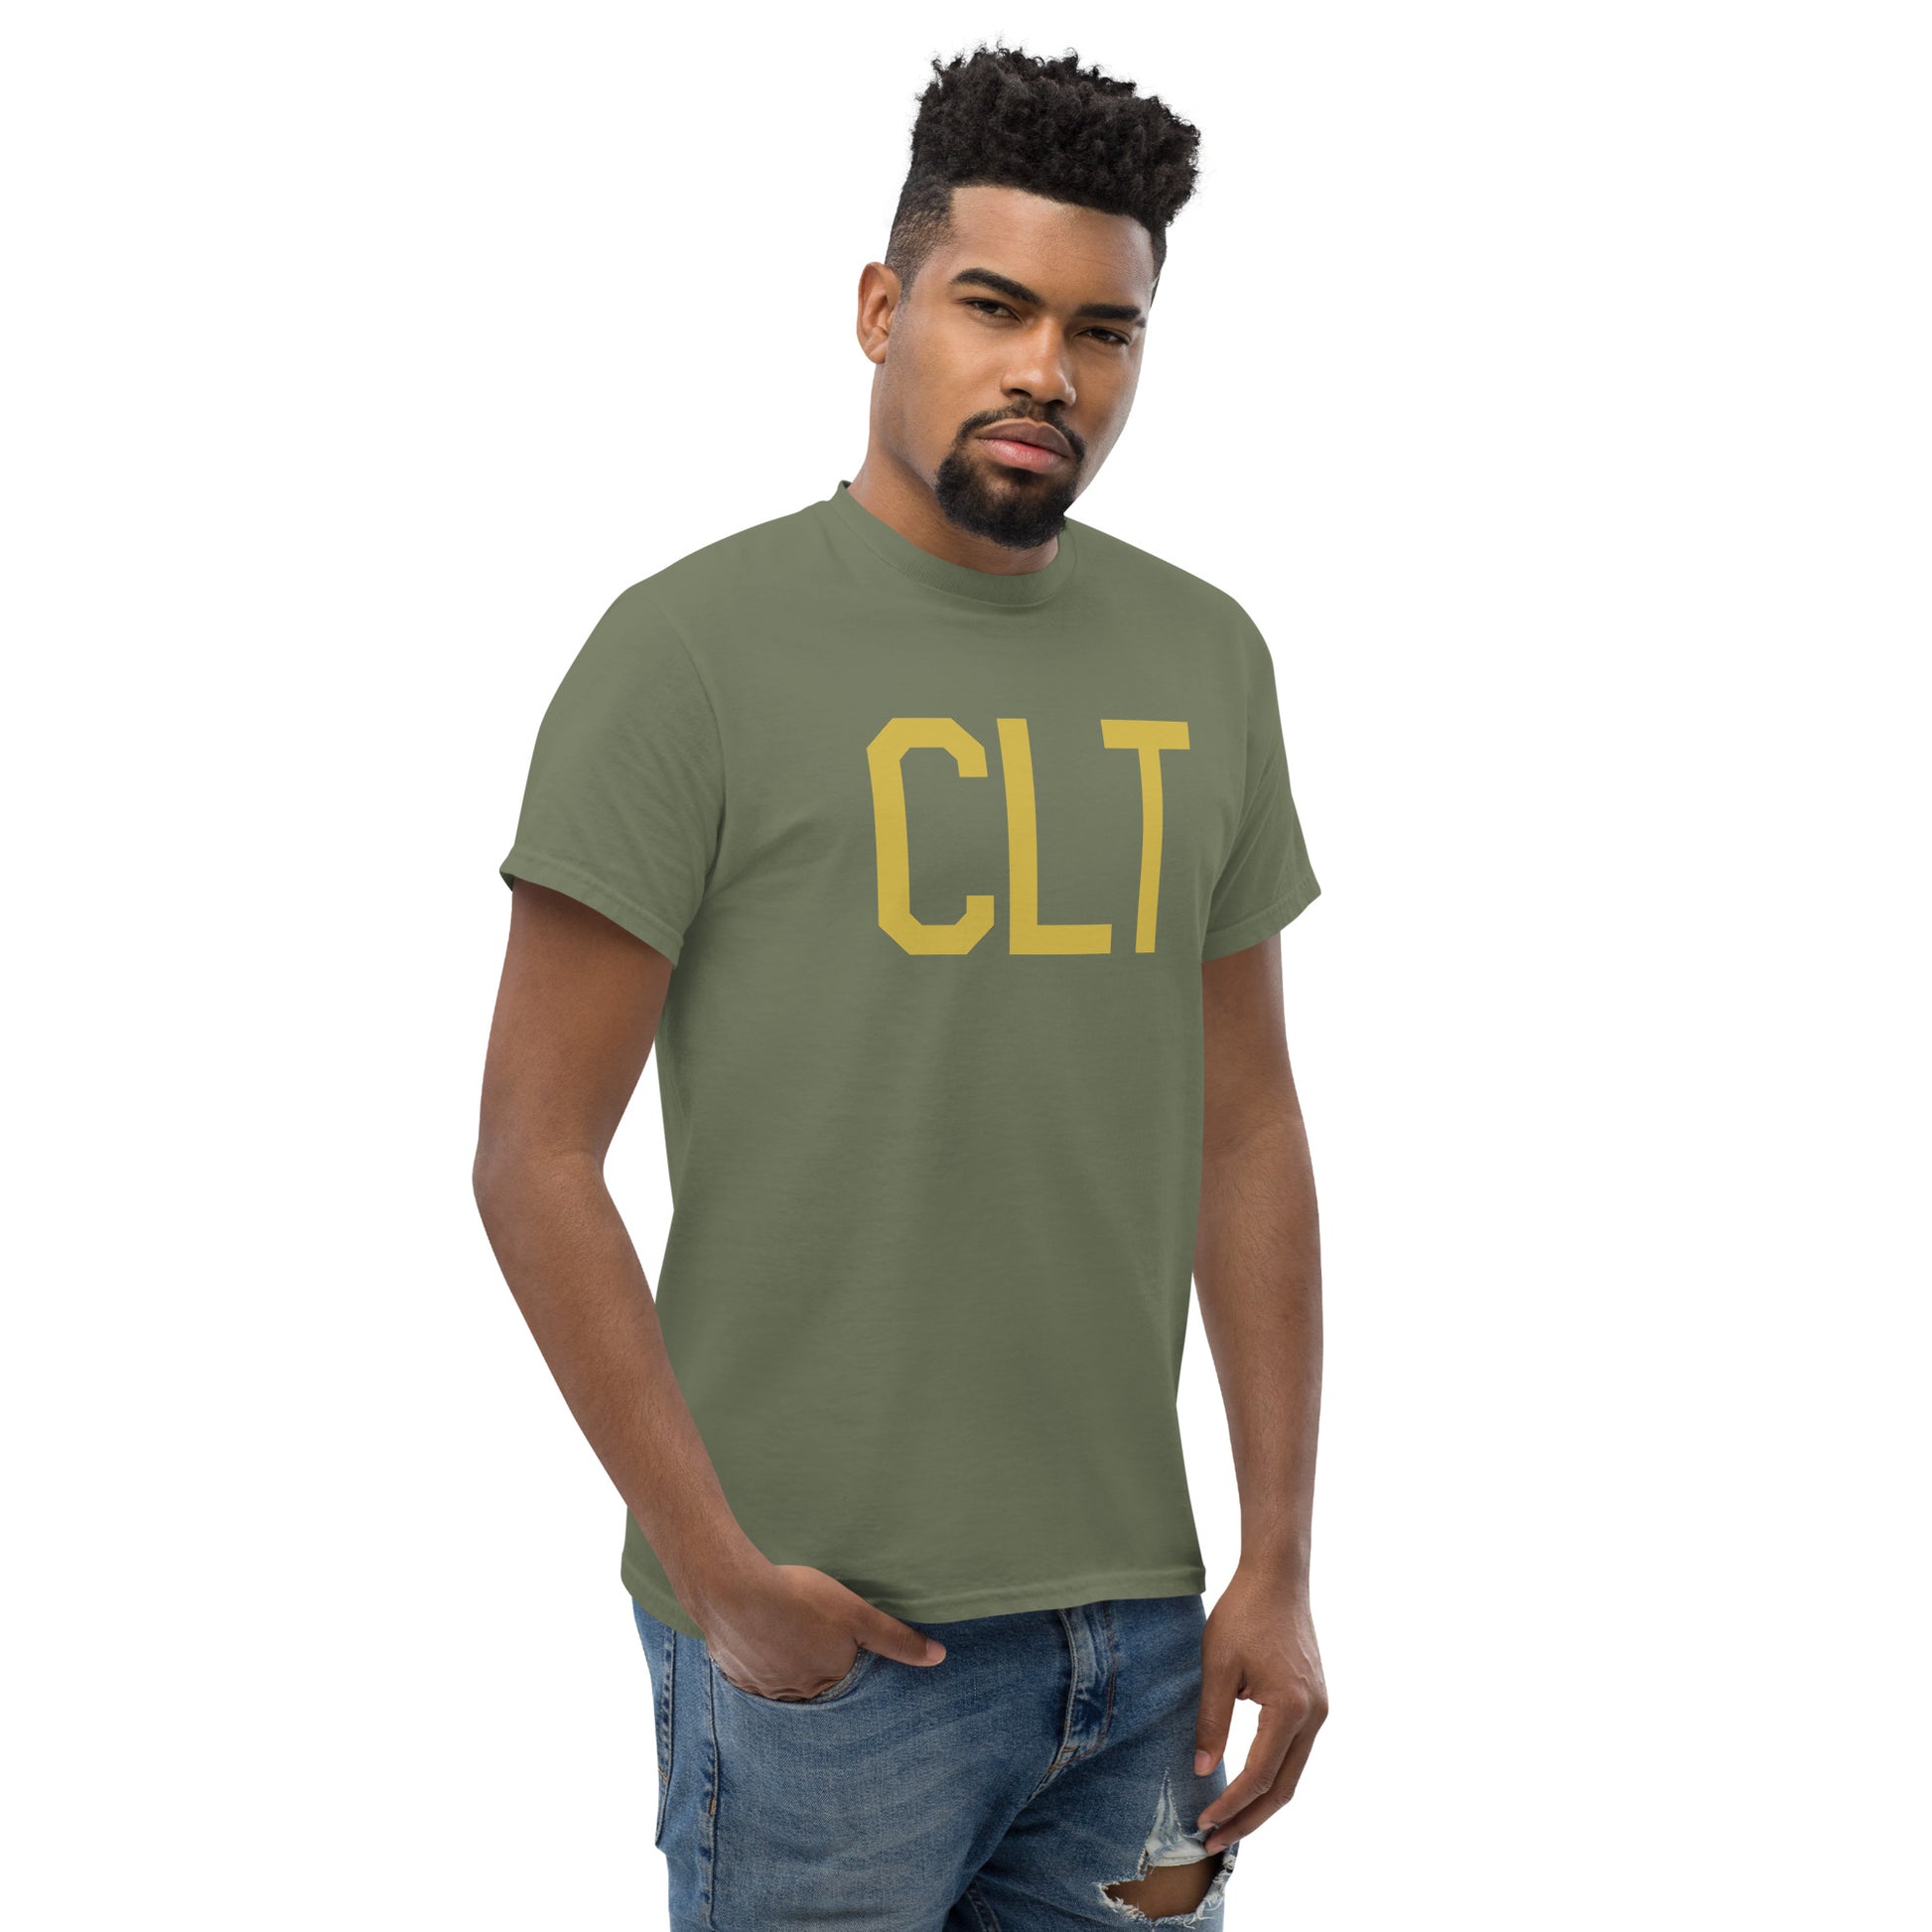 Aviation Enthusiast Men's Tee - Old Gold Graphic • CLT Charlotte • YHM Designs - Image 08